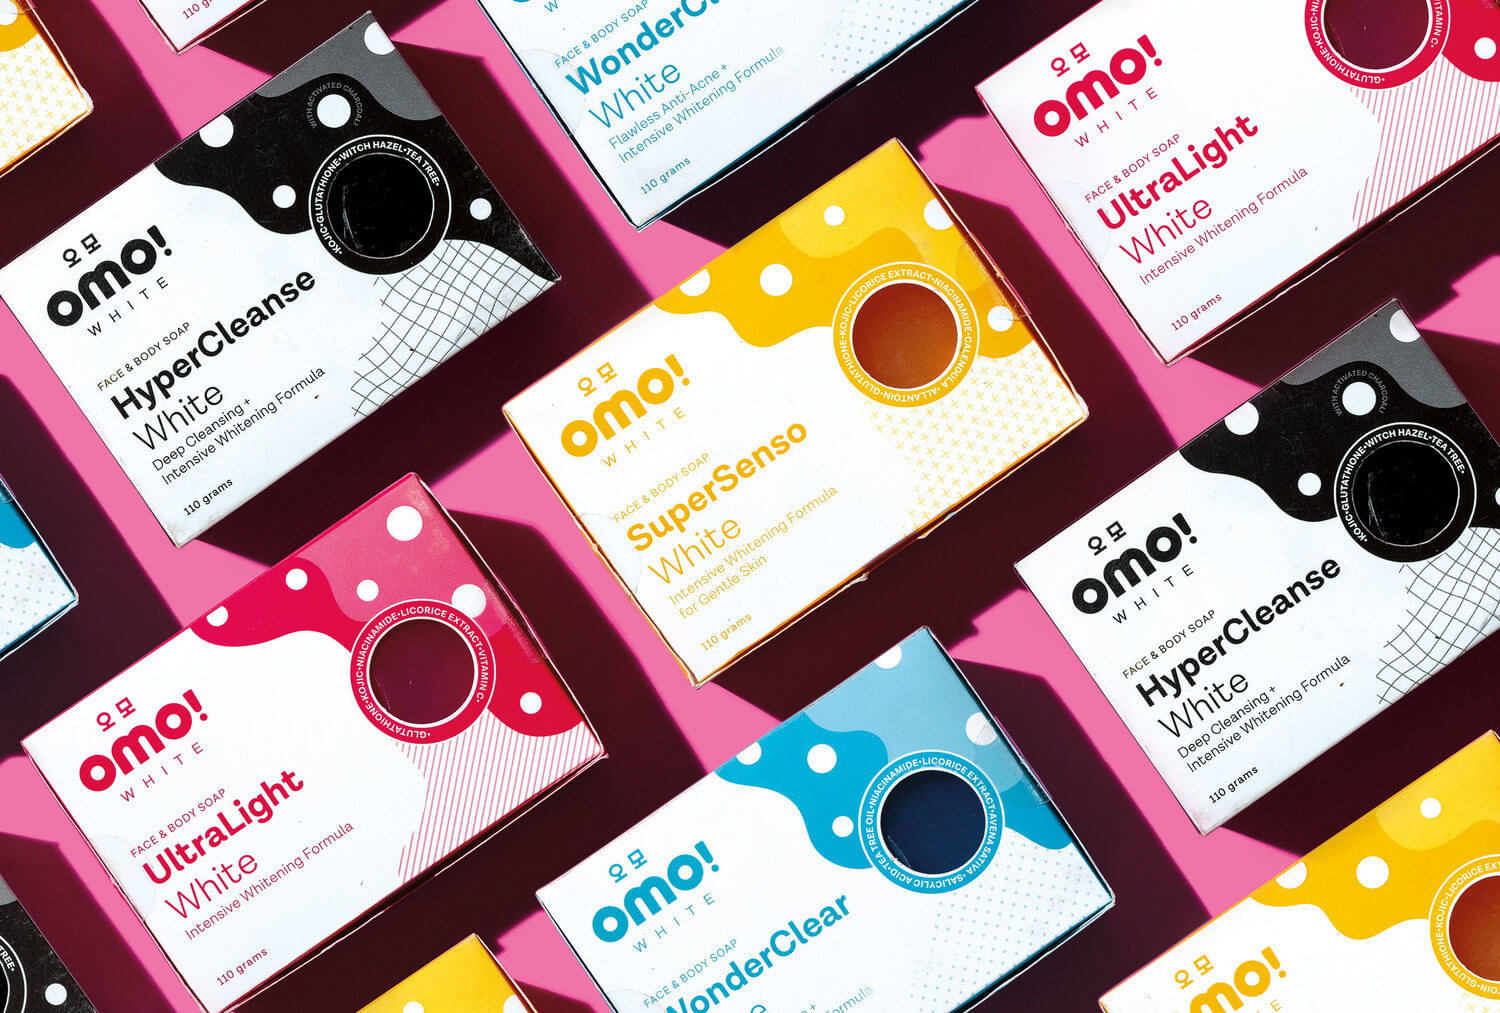 A flat lay of cute and fun soap box packaging designs for beauty and skincare brand Omo! White